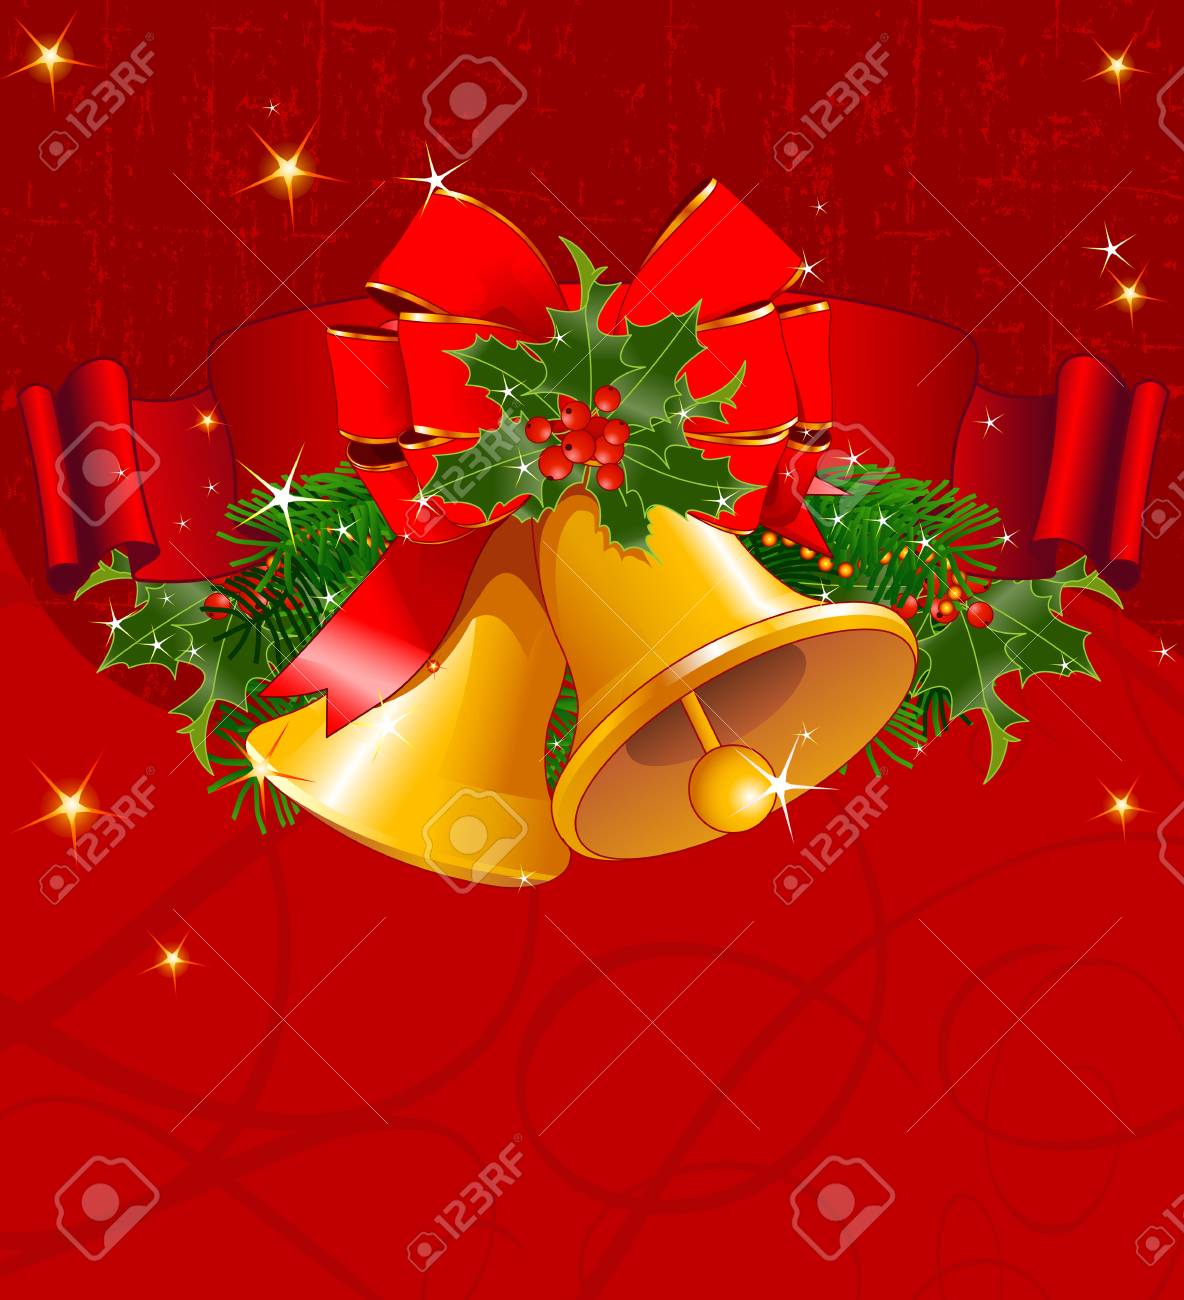 Christmas Bell Background With Holiday Decorations Royalty